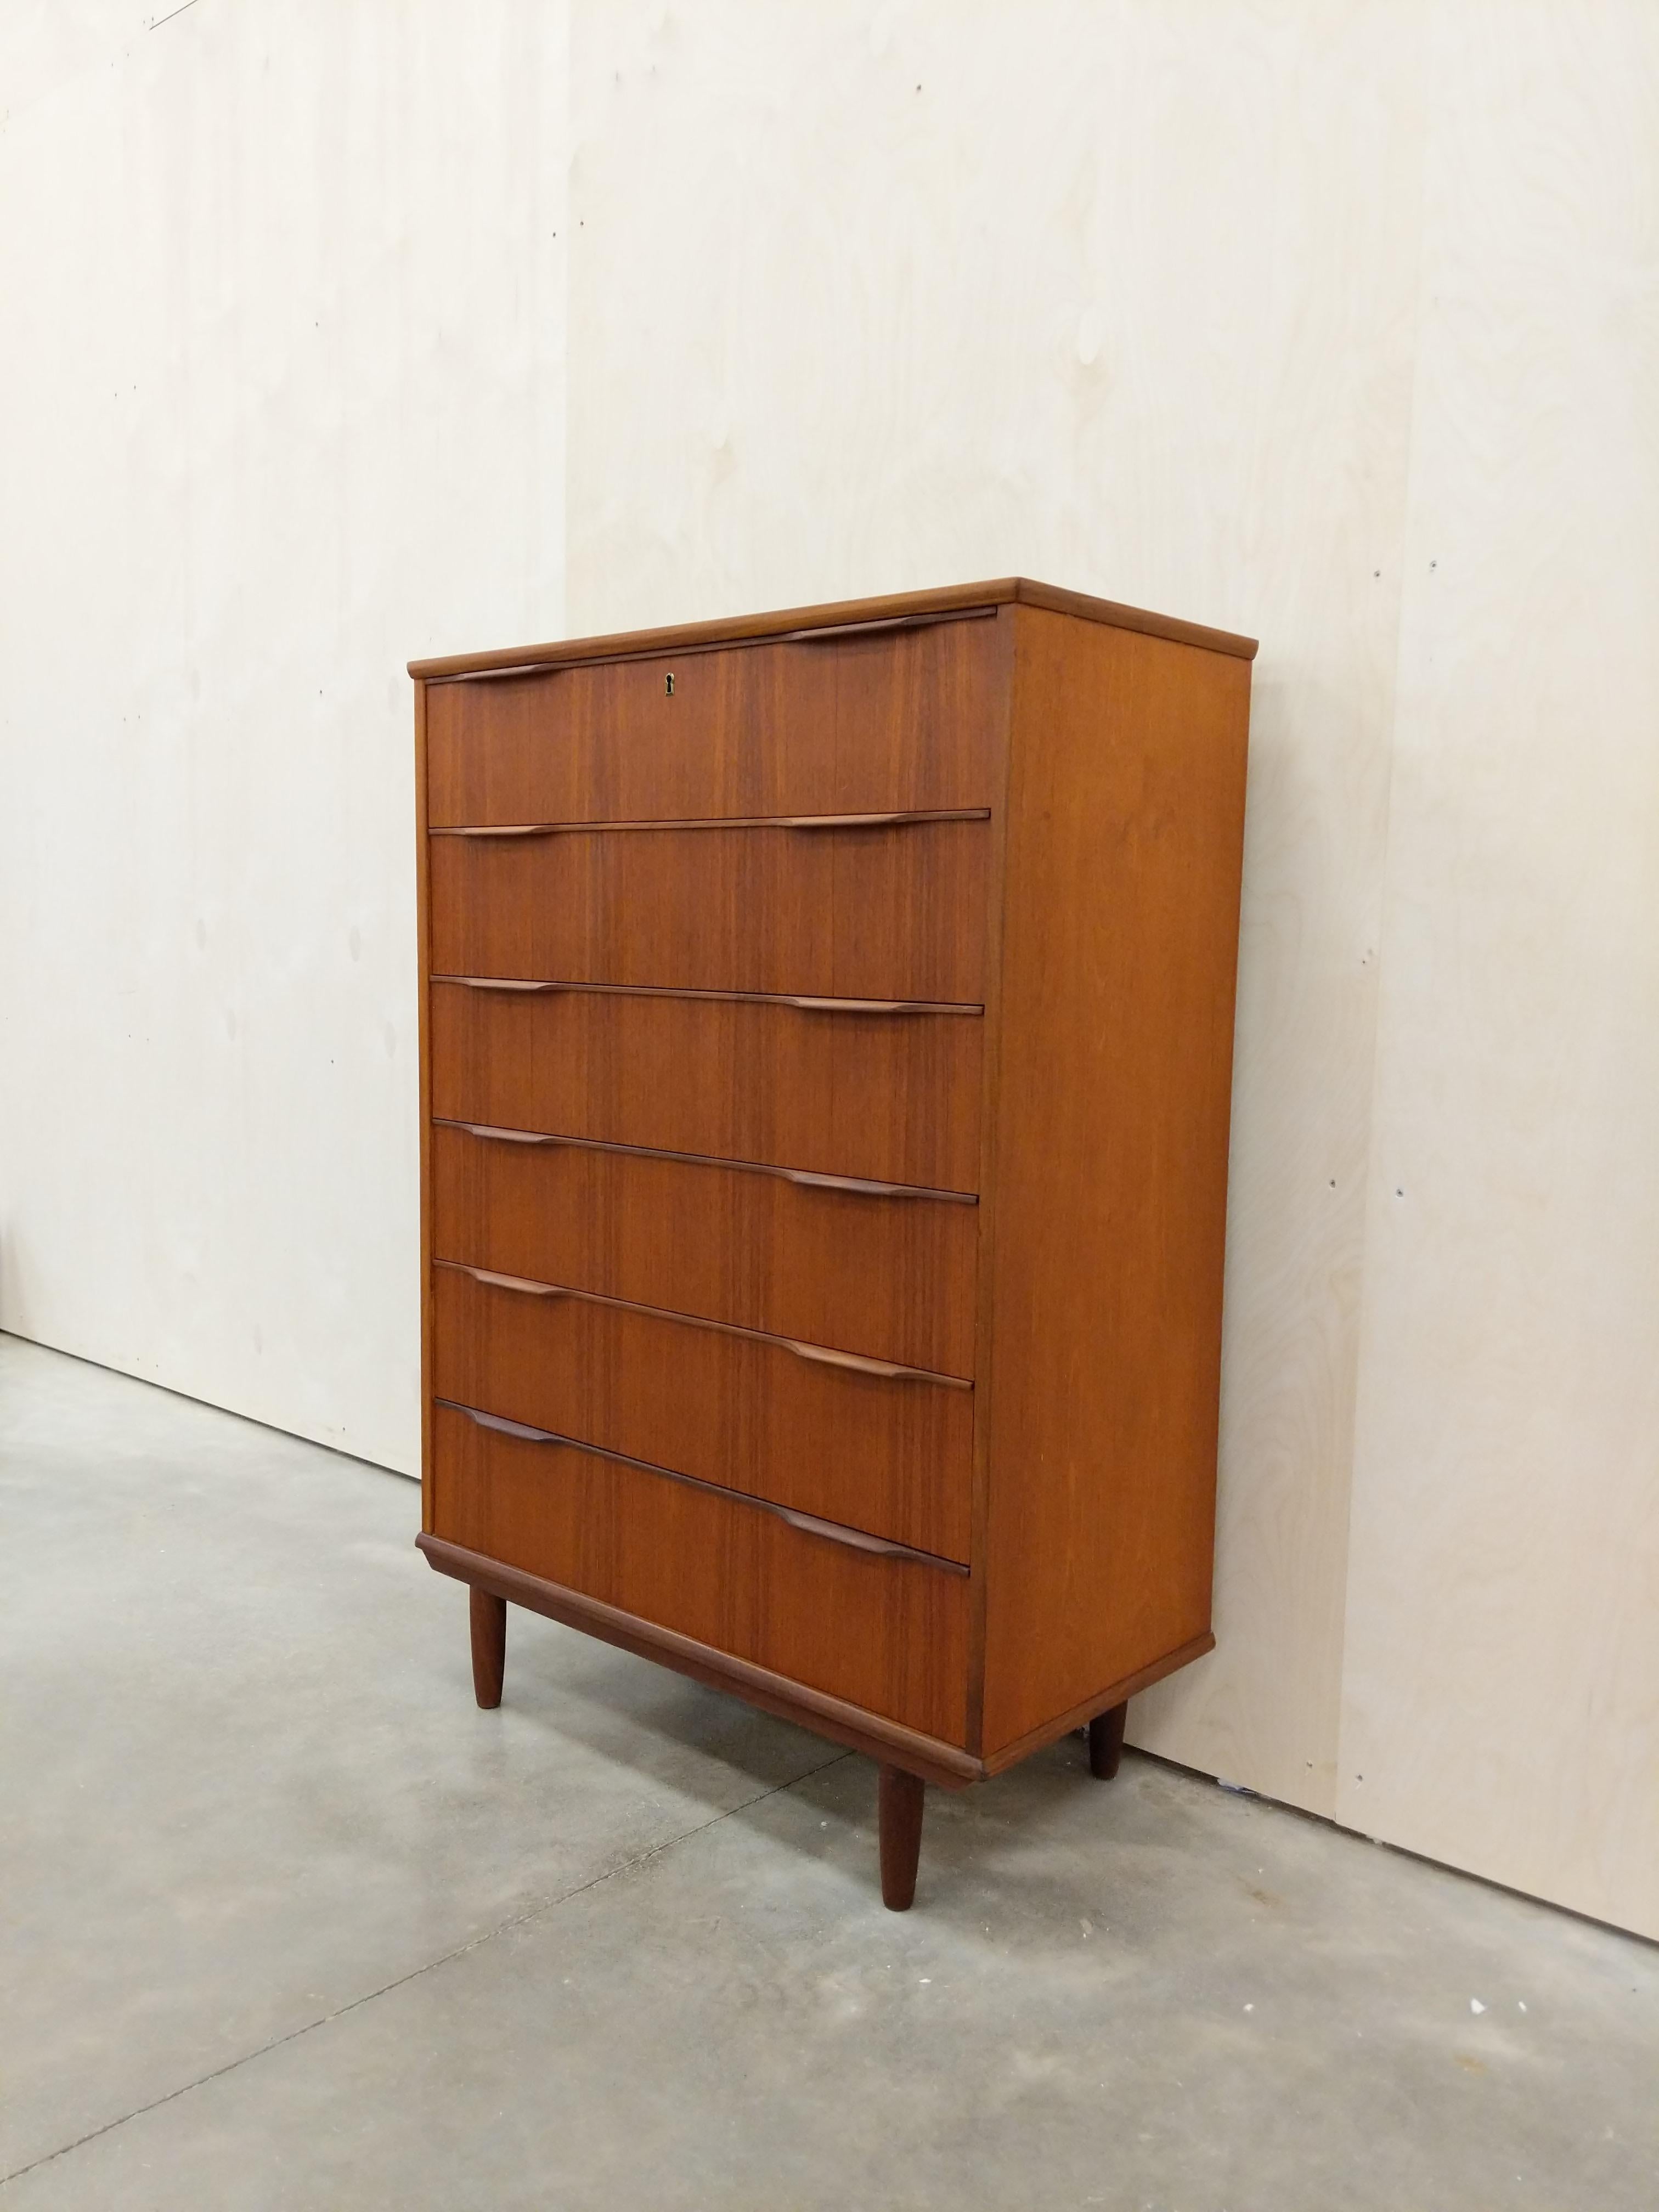 Authentic vintage mid century Danish / Scandinavian Modern teak dresser / chest of drawers.

By Ejsing Møbelfabrik.

This piece is in excellent refinished condition with very few signs of age-related wear (see photos).

If you would like any